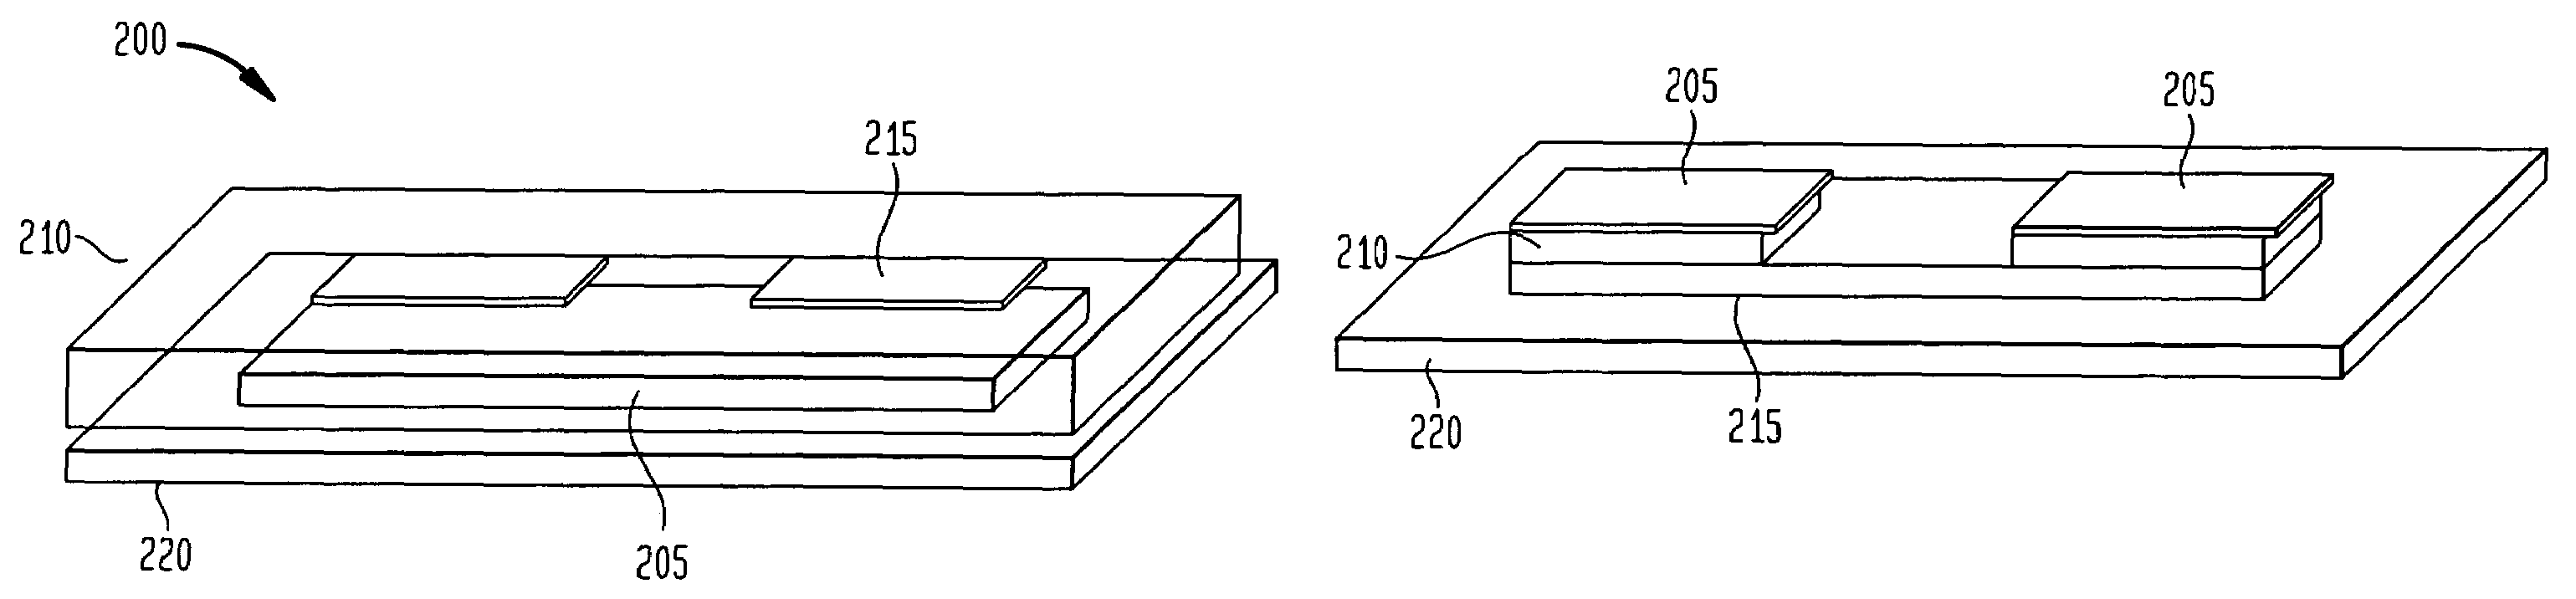 Method of isolation for acoustic resonator device